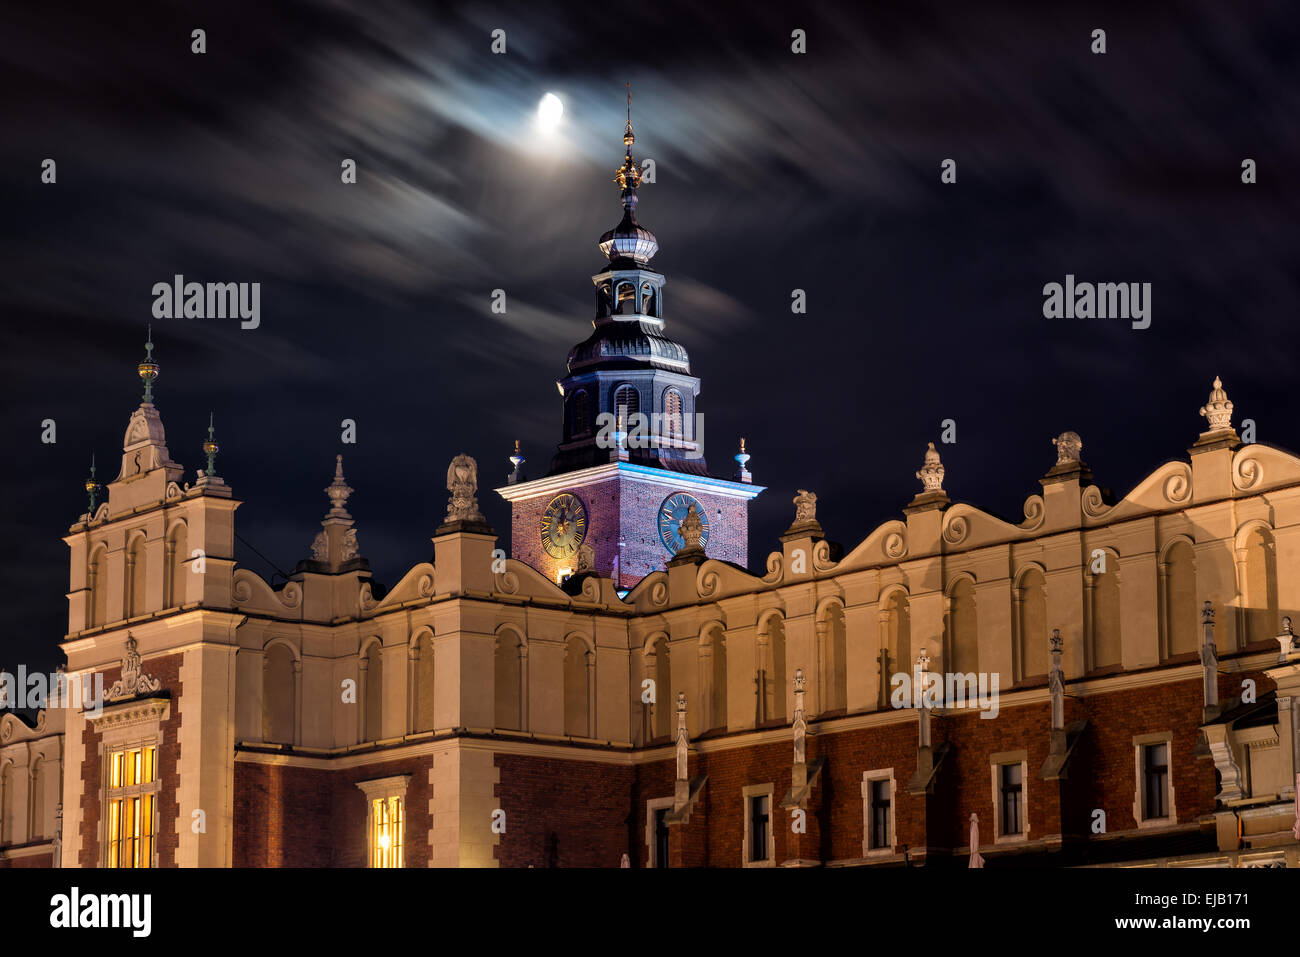 Cloth halls and tower of the city hall in Krakow Stock Photo